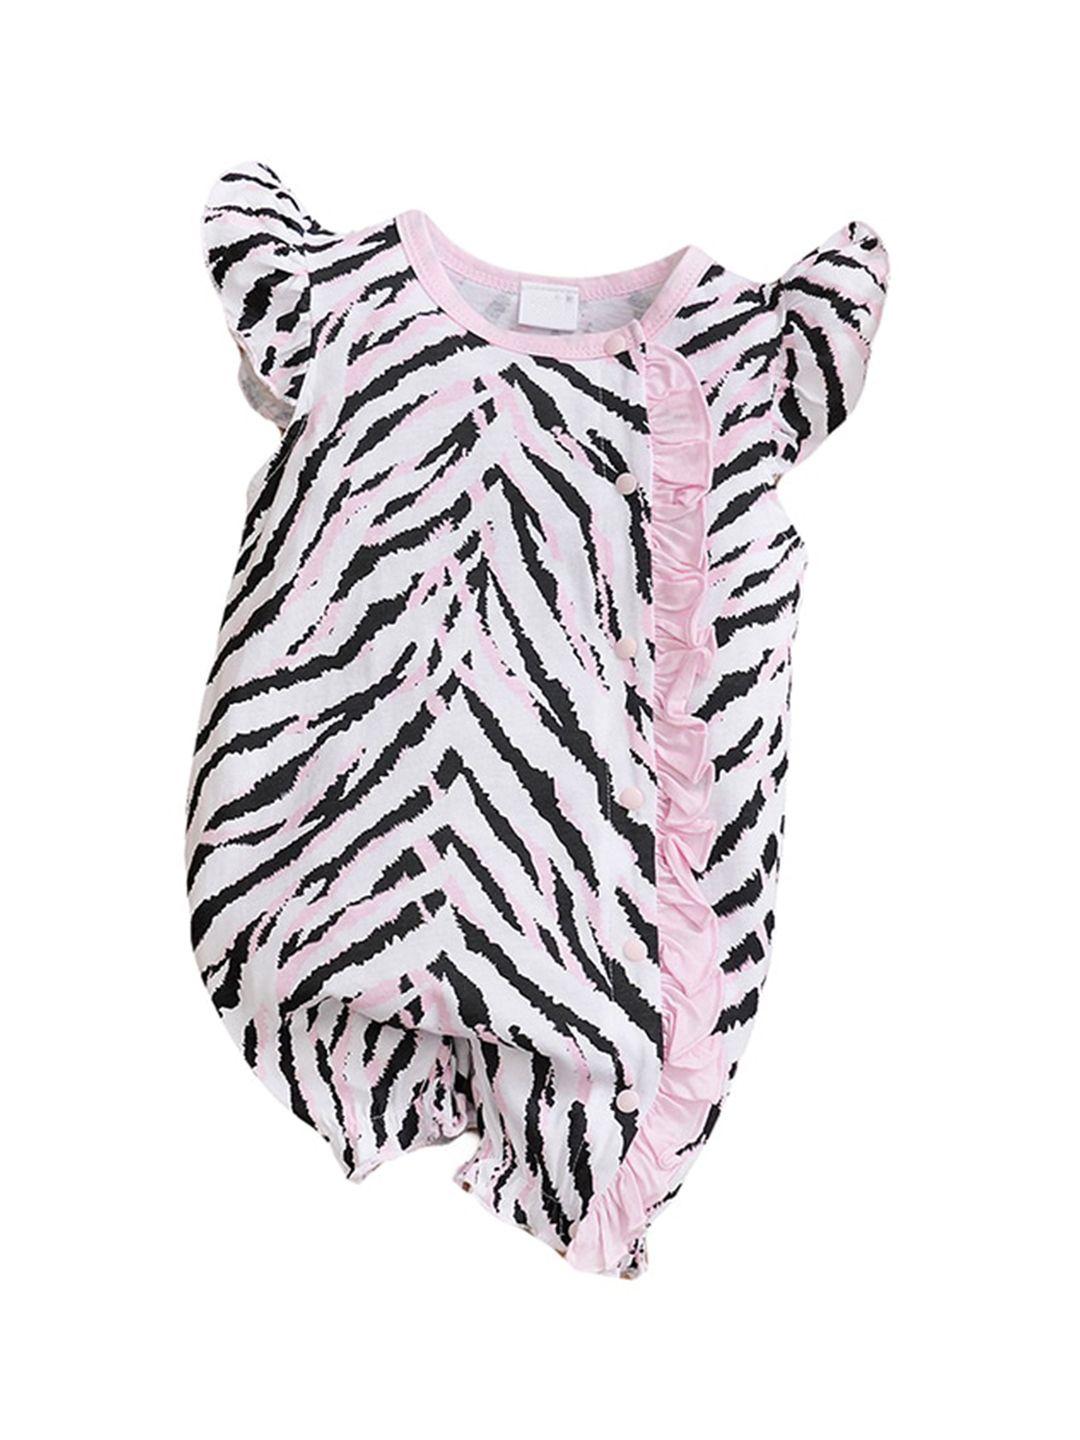 stylecast-infant-girls-animal-skin-printed-pure-cotton-rompers